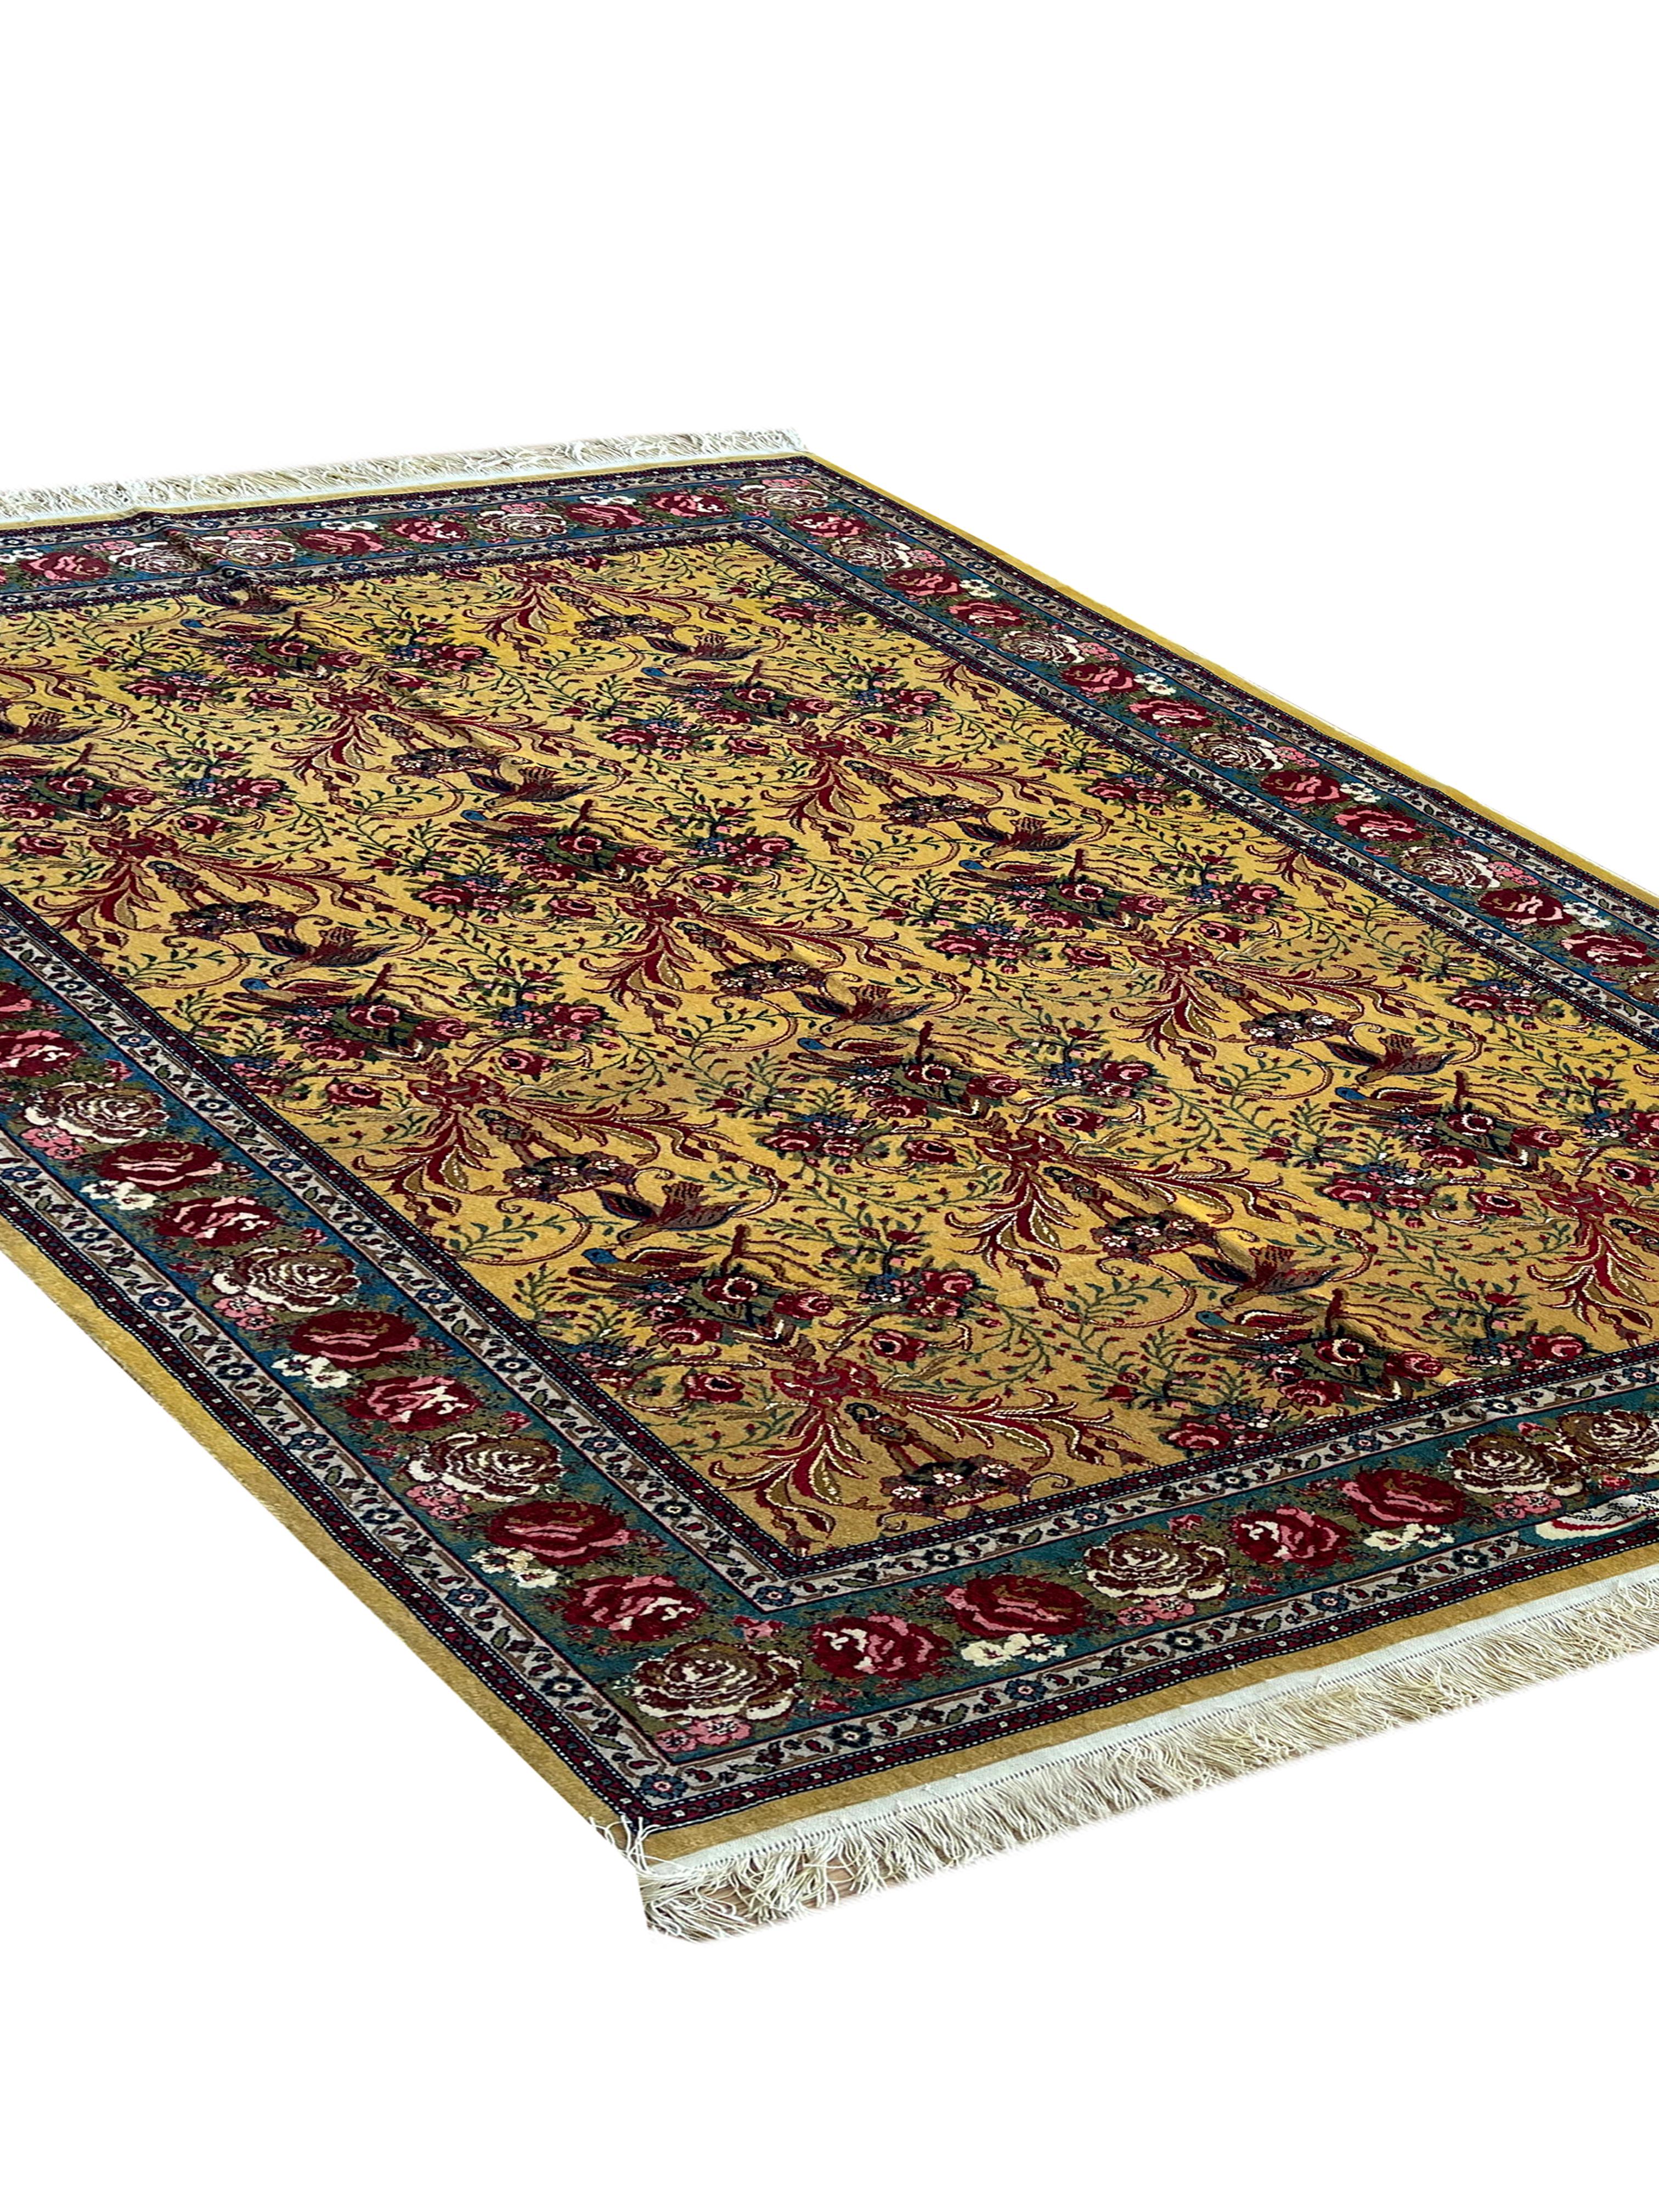 Contemporary Outstanding Rug, All Over Paradise Carpet, Handwoven Gold Rug For Sale